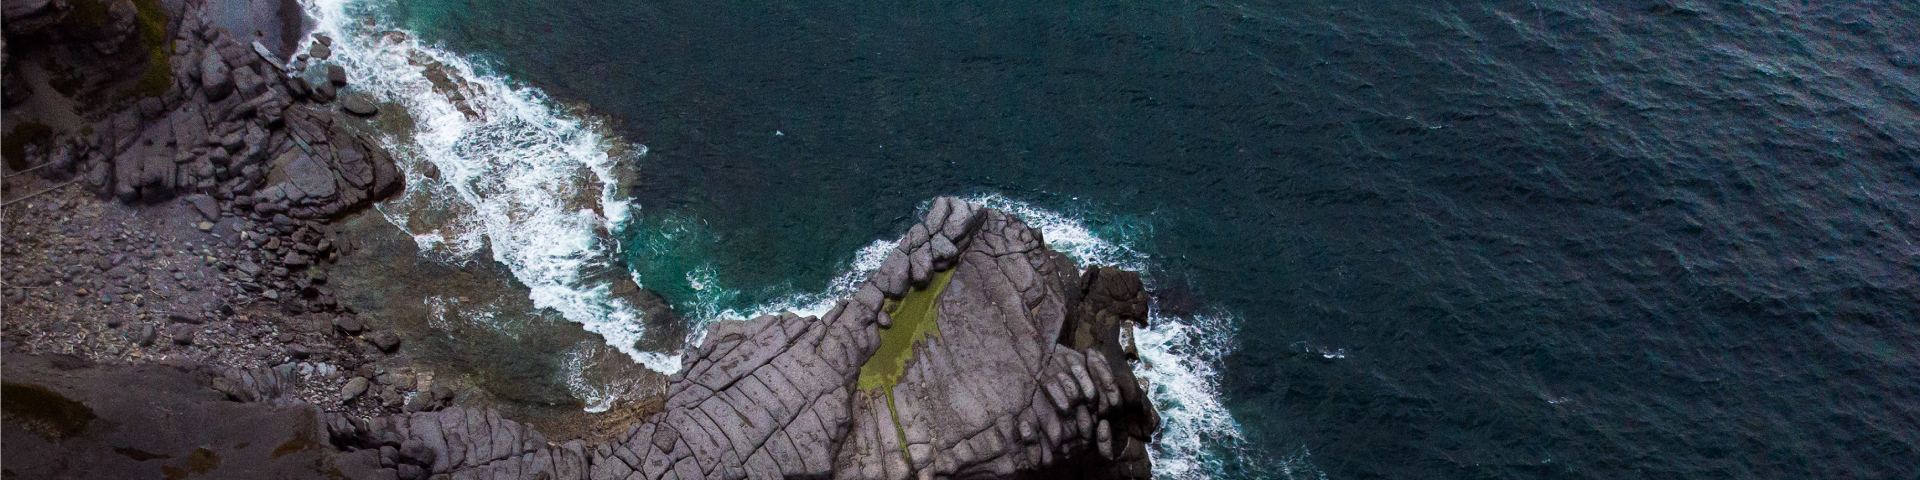 A view from above shows waves splashing on the coast near Port au Choix National Historic Site